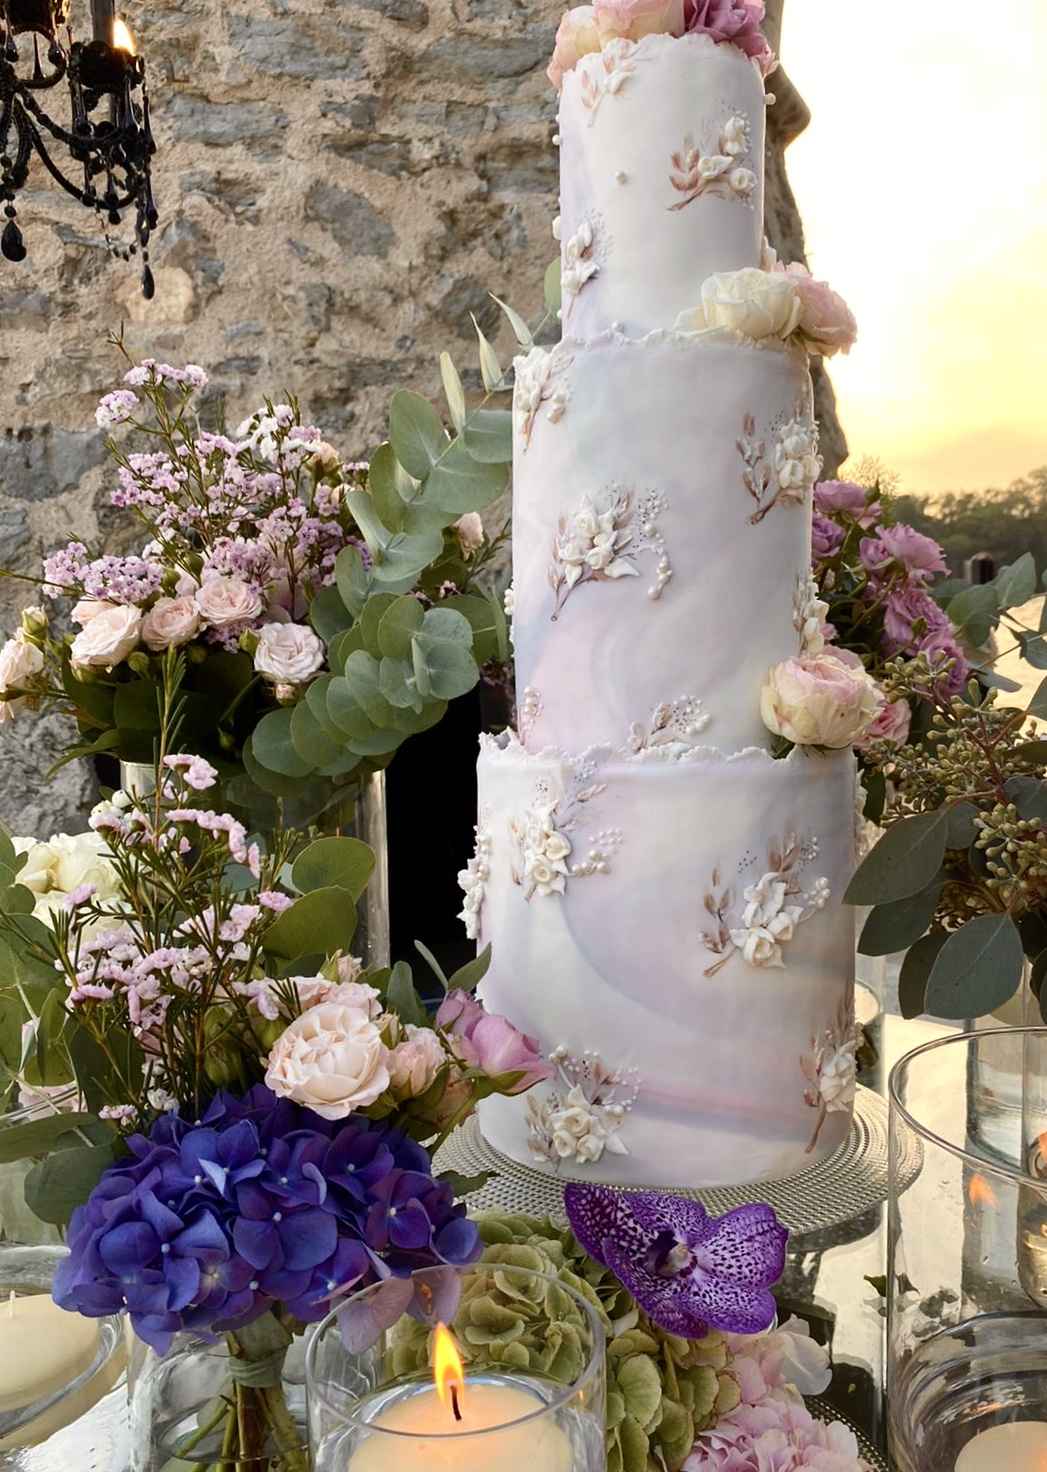 Floral Wedding Cakes - Cut Above Cake Co.